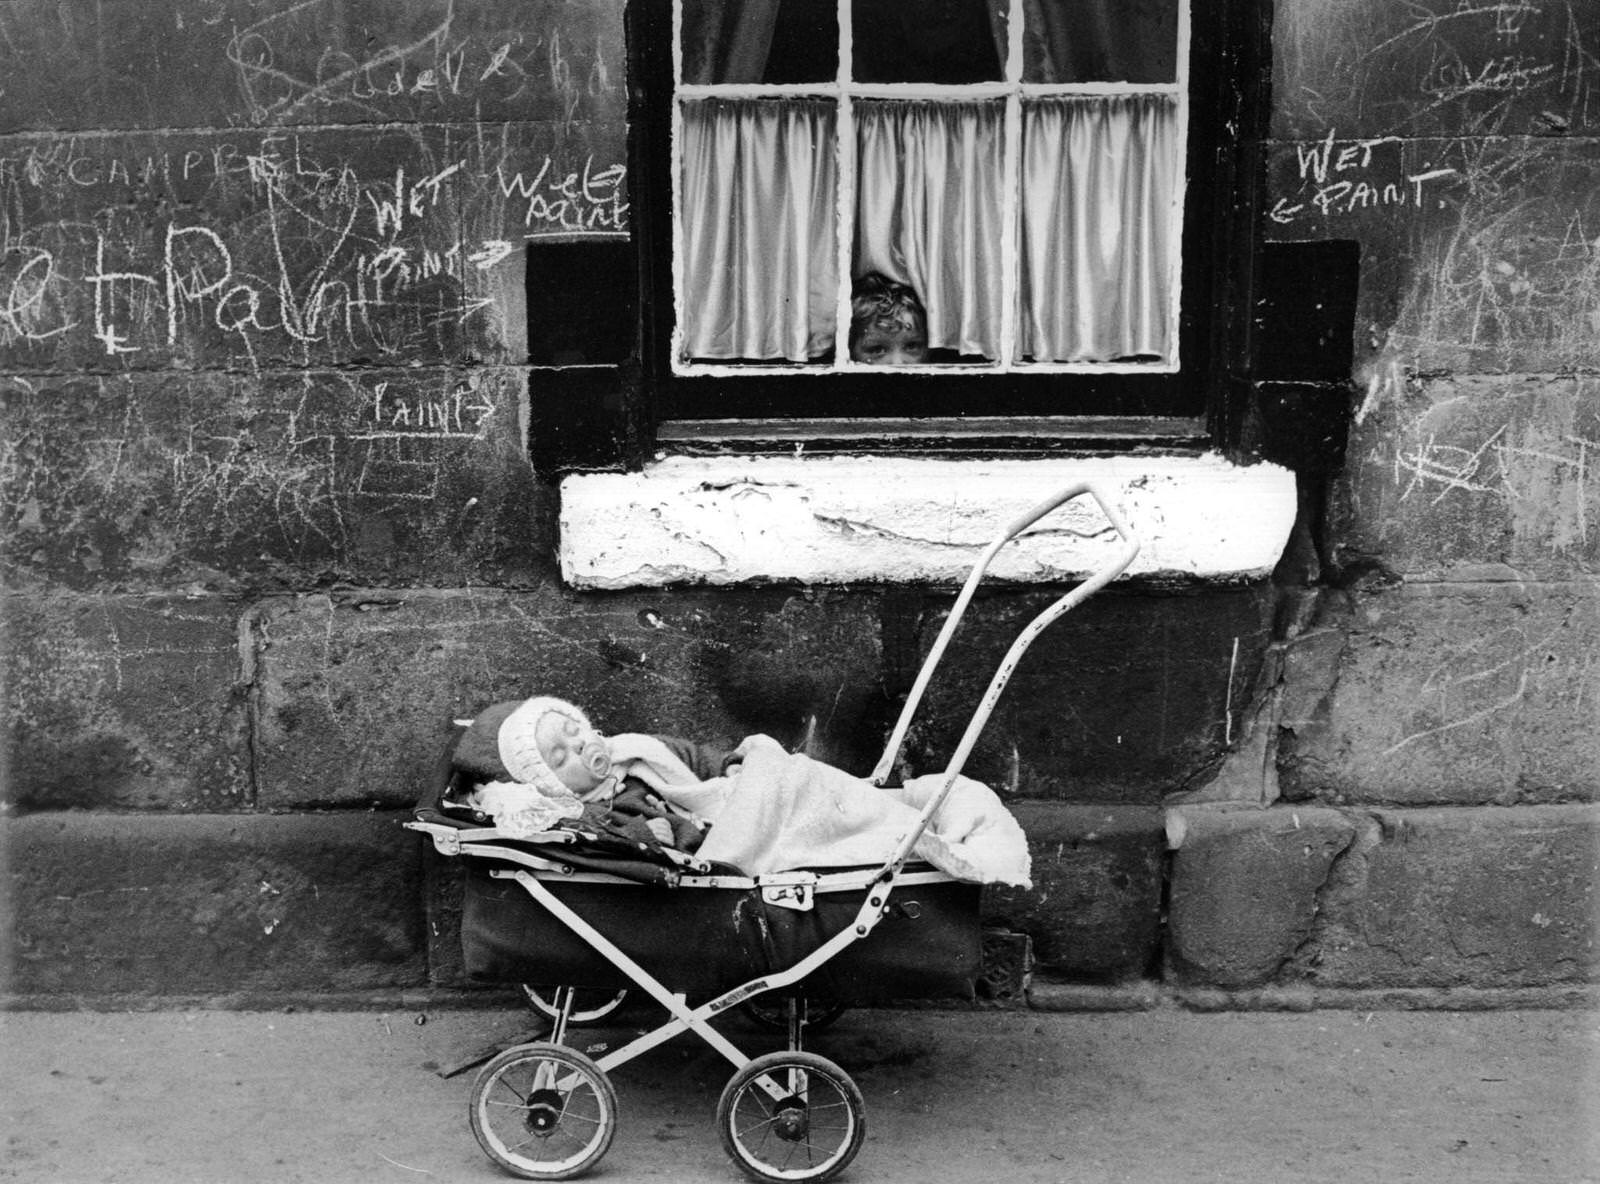 A child looks at a baby in a pram from the window of a tenement block in the Gorbals area of Glasgow, before demolition, 1960